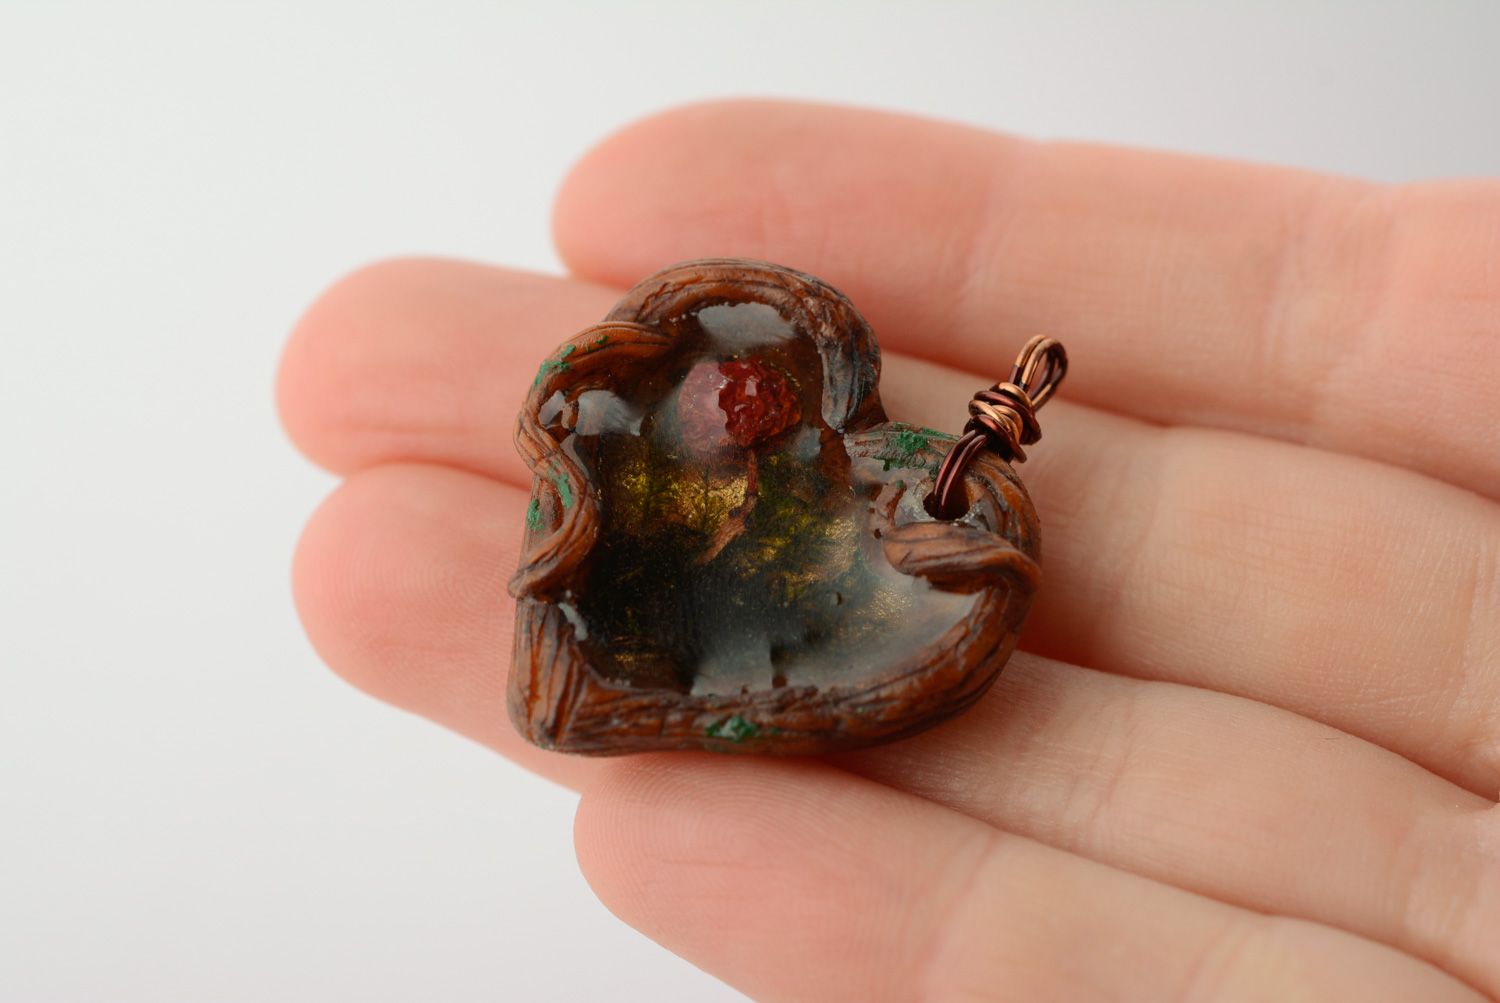 Homemade heart-shaped pendant with moss and berries inside coated with epoxy photo 4